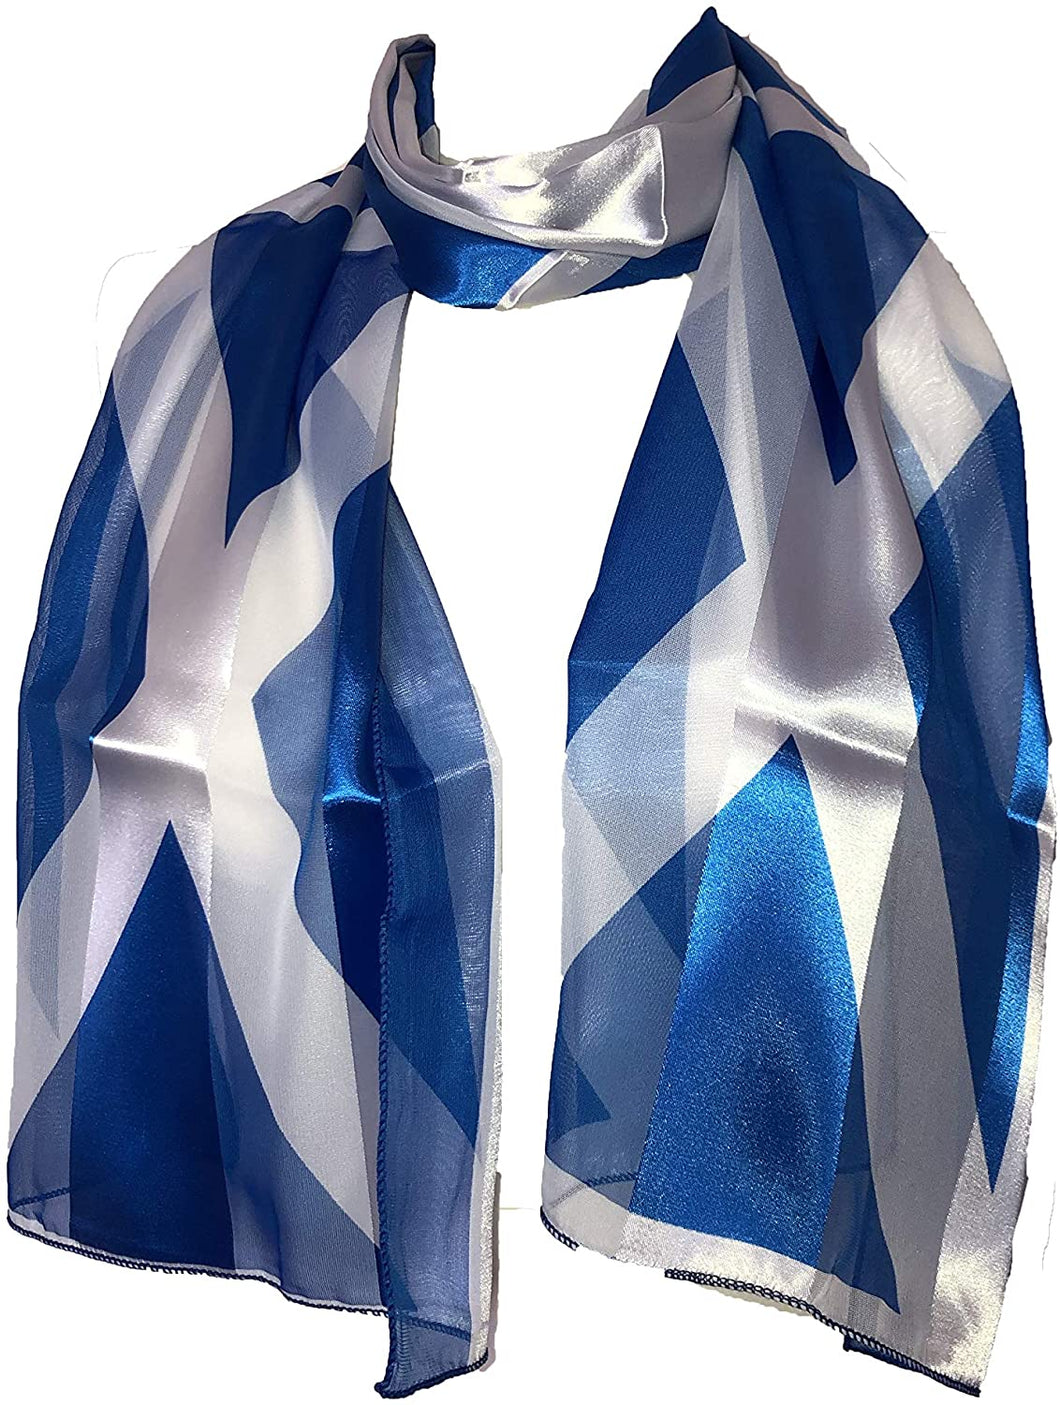 Pamper Yourself Now Scottish Flag Scarf Thin Pretty Scarf Great for Any Outfit Lovely Gift